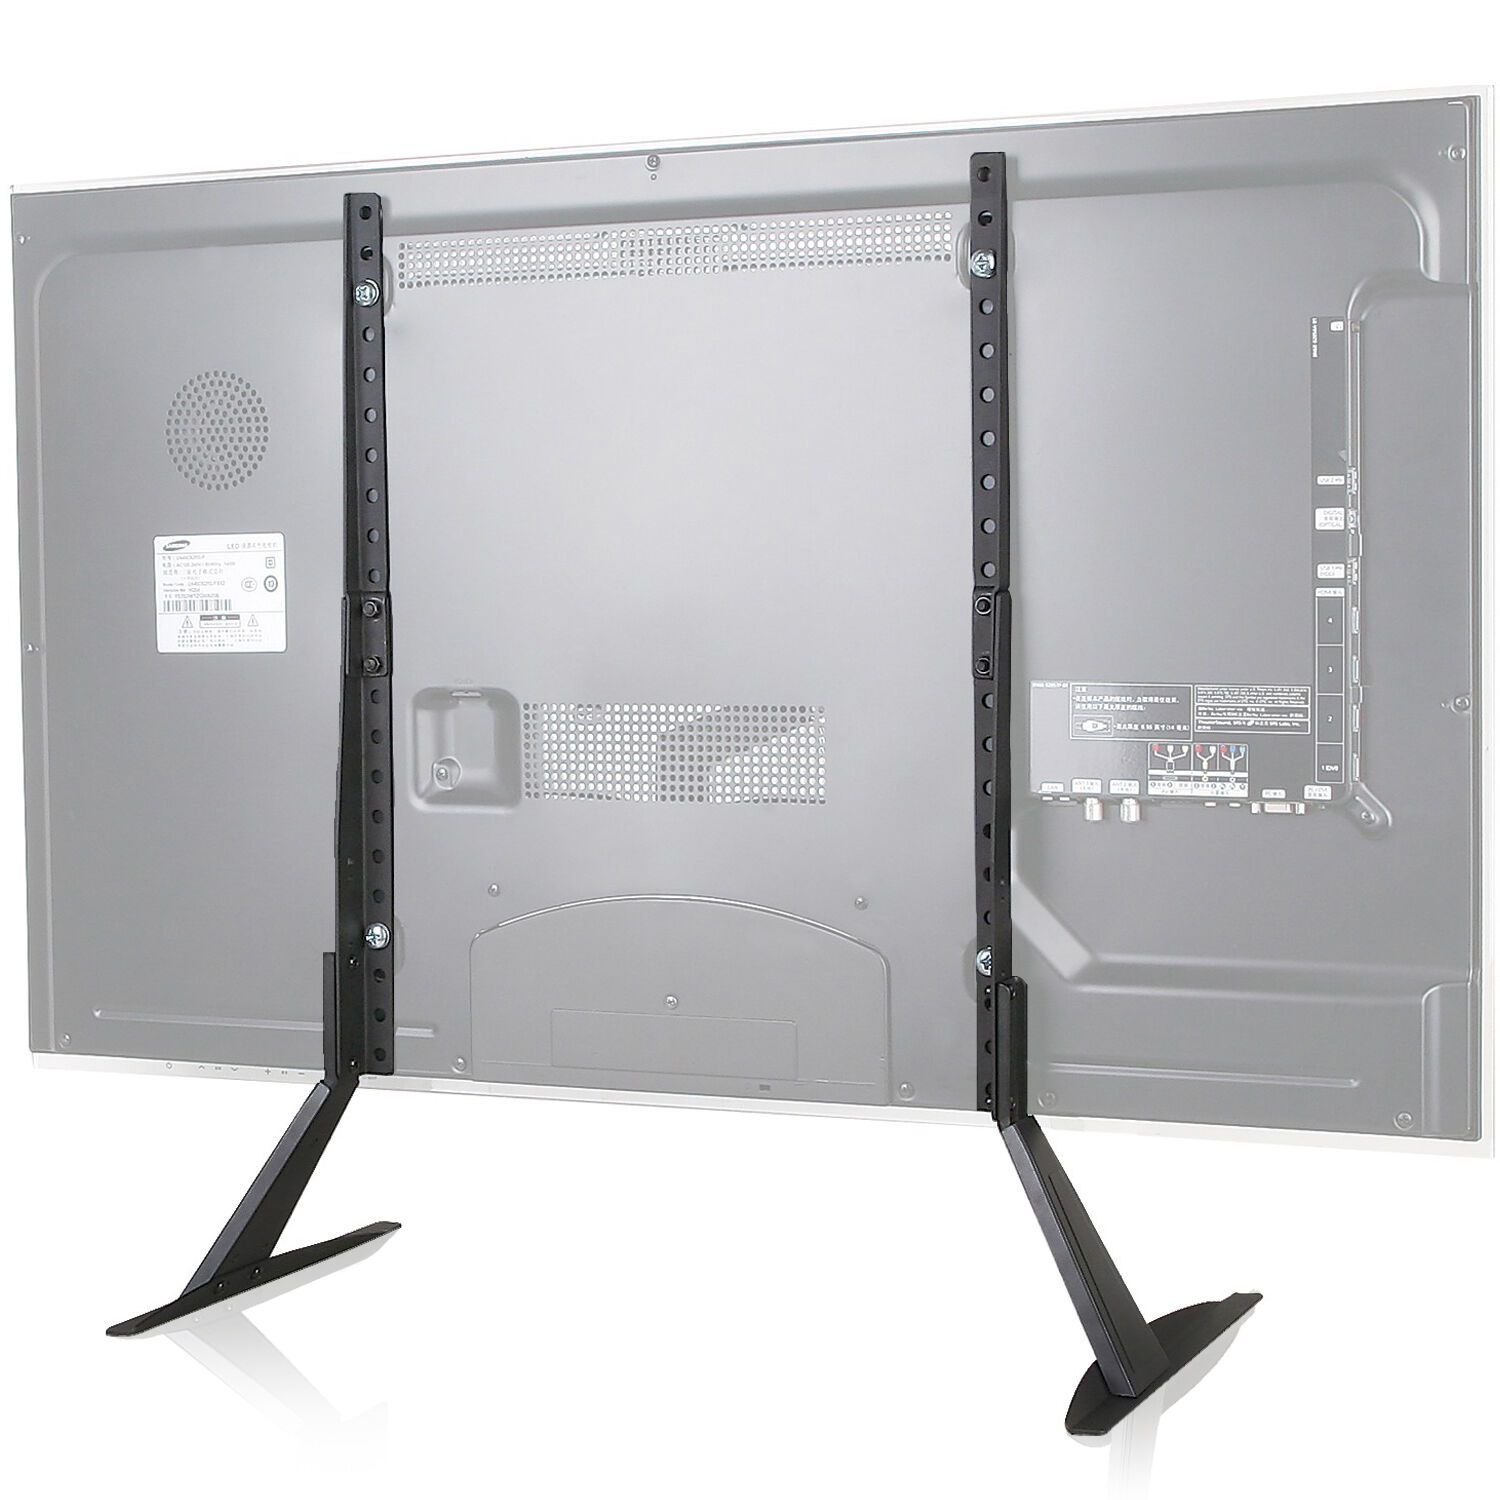 Wali Universal Lcd Flat Screen Tv Table Top Stand / Base Fits 22" To 65" Tvs001